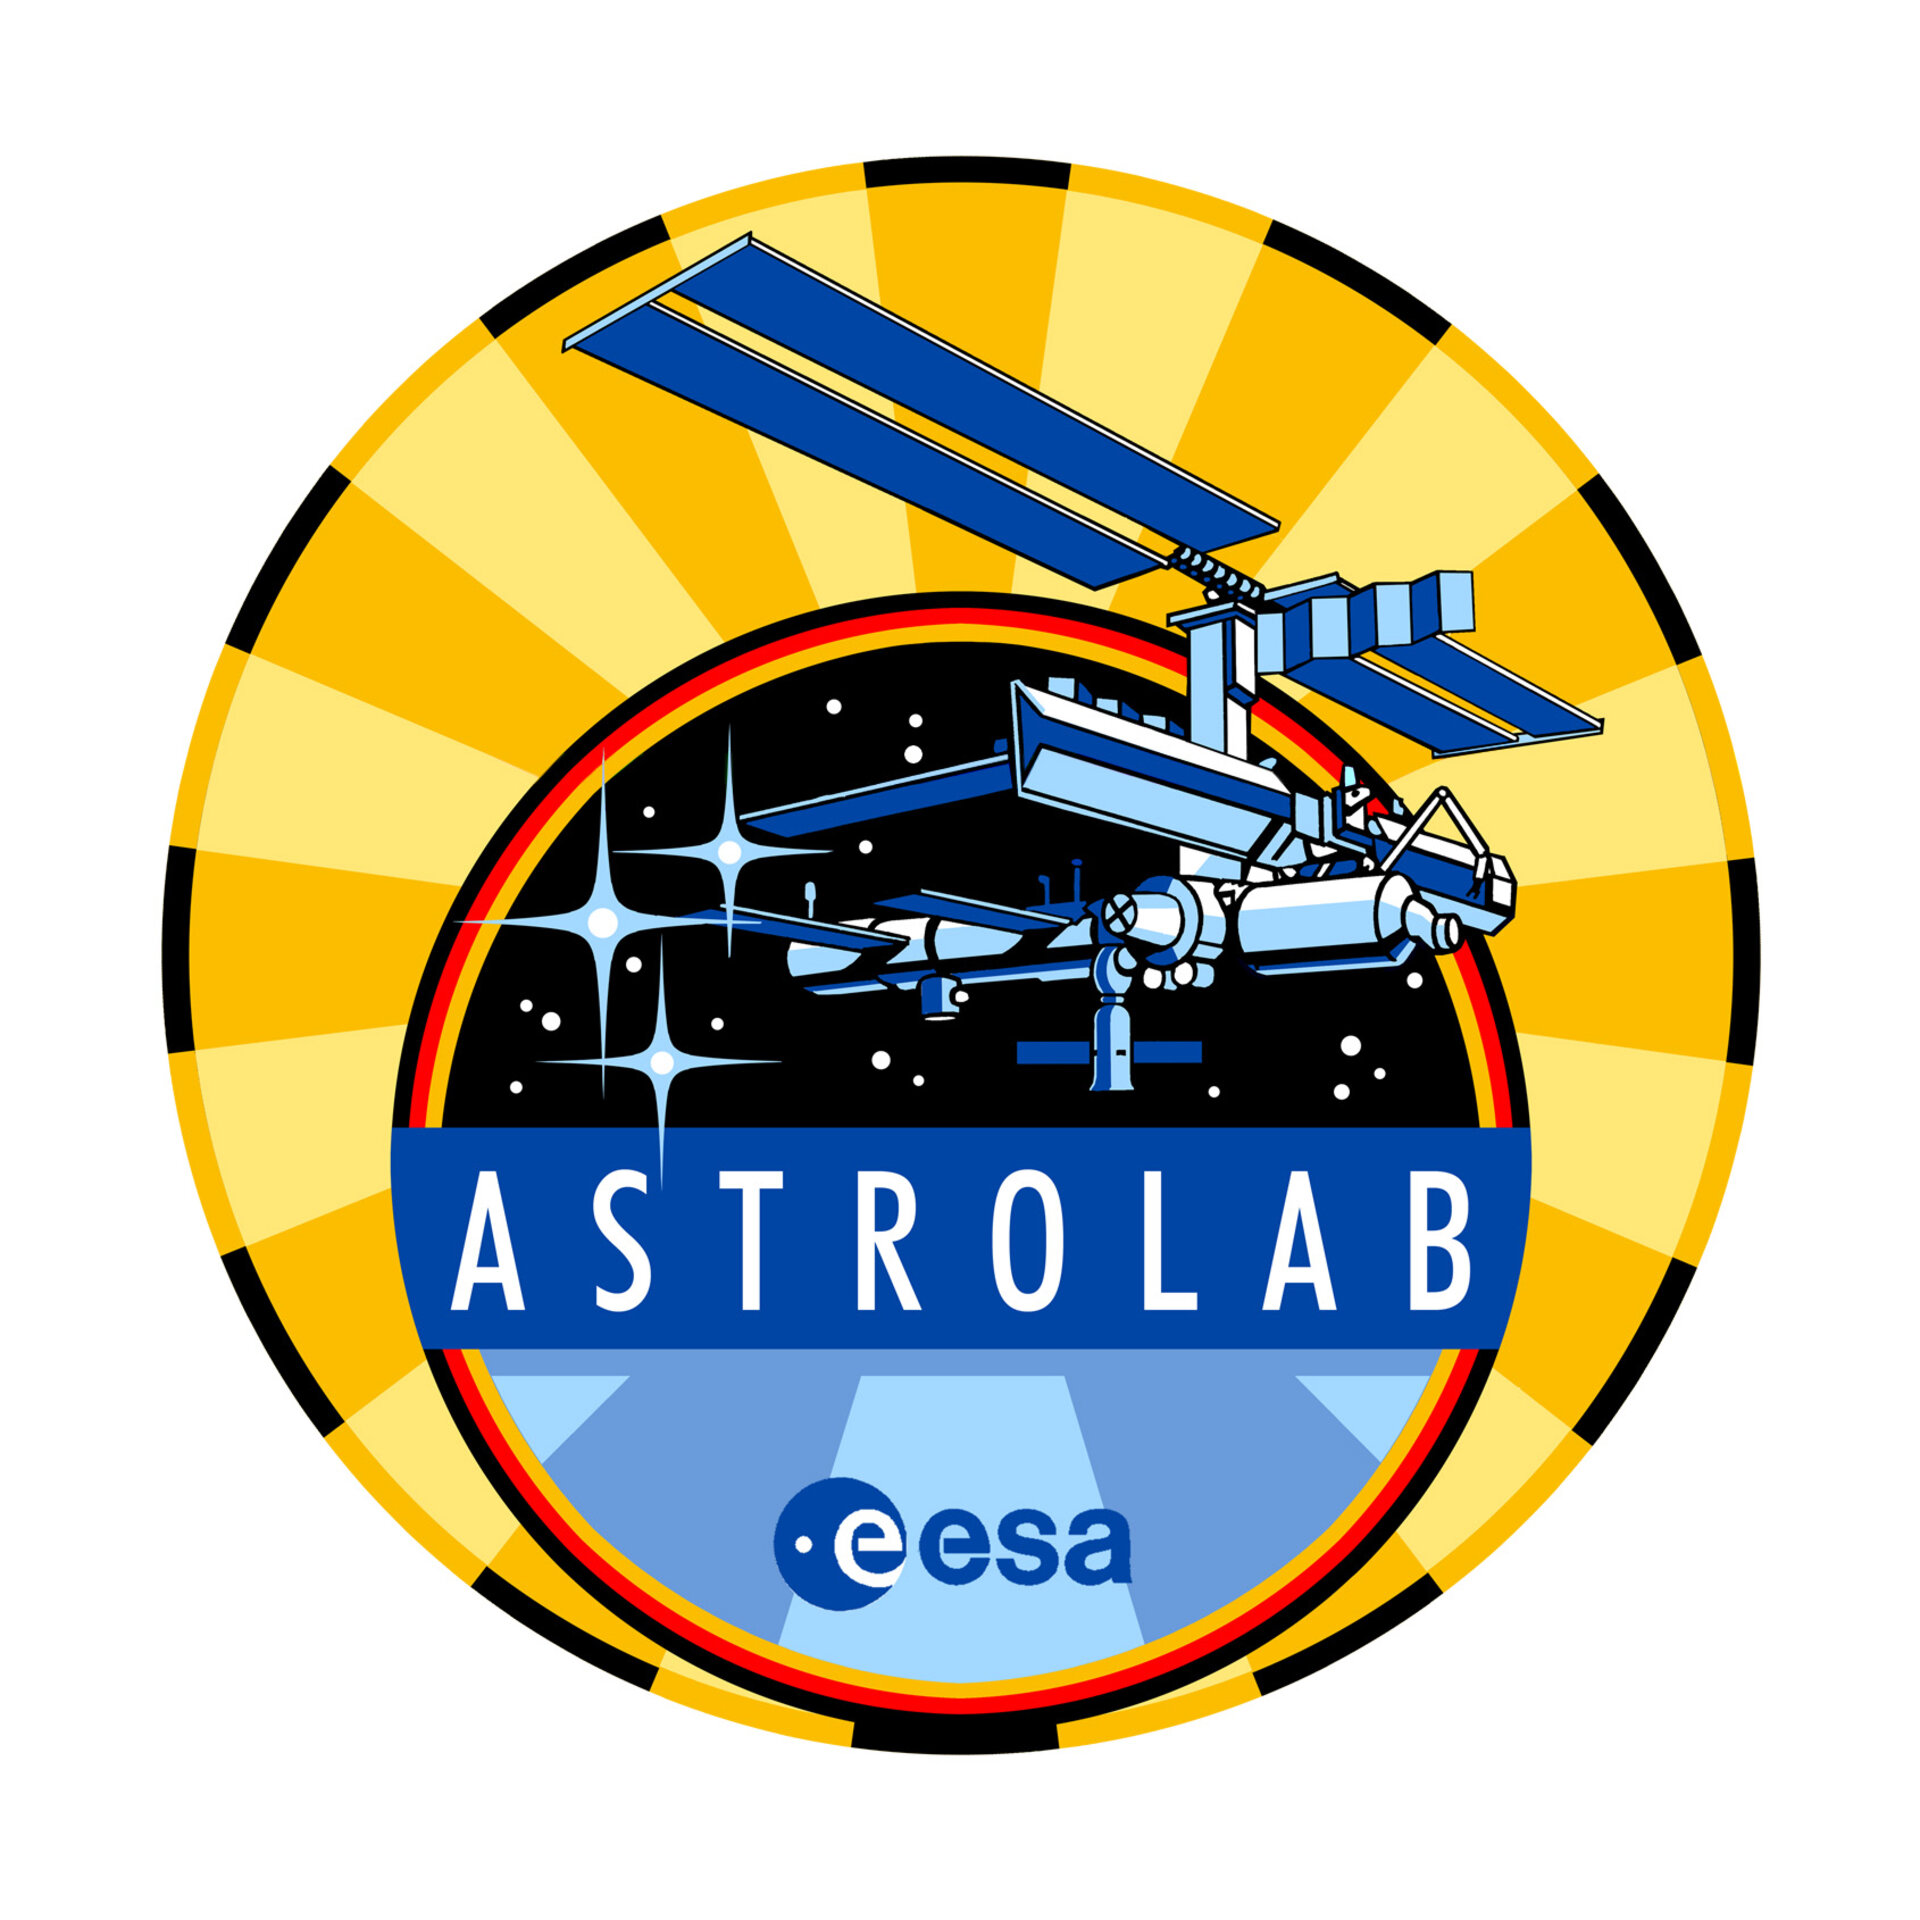 STS-121 Astrolab mission patch, 2006